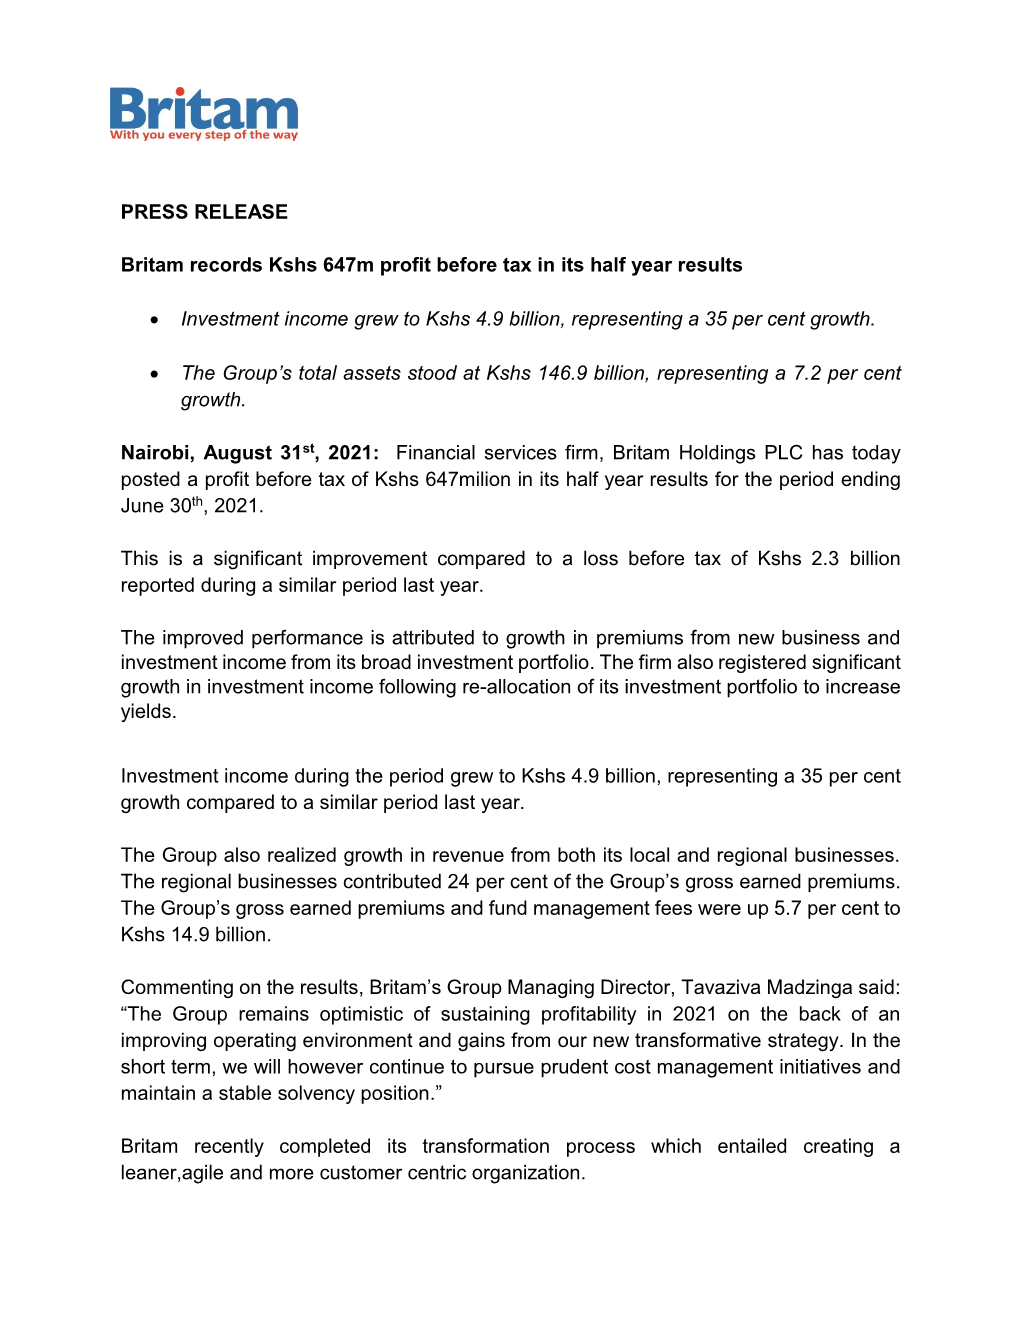 PRESS RELEASE Britam Records Kshs 647M Profit Before Tax in Its